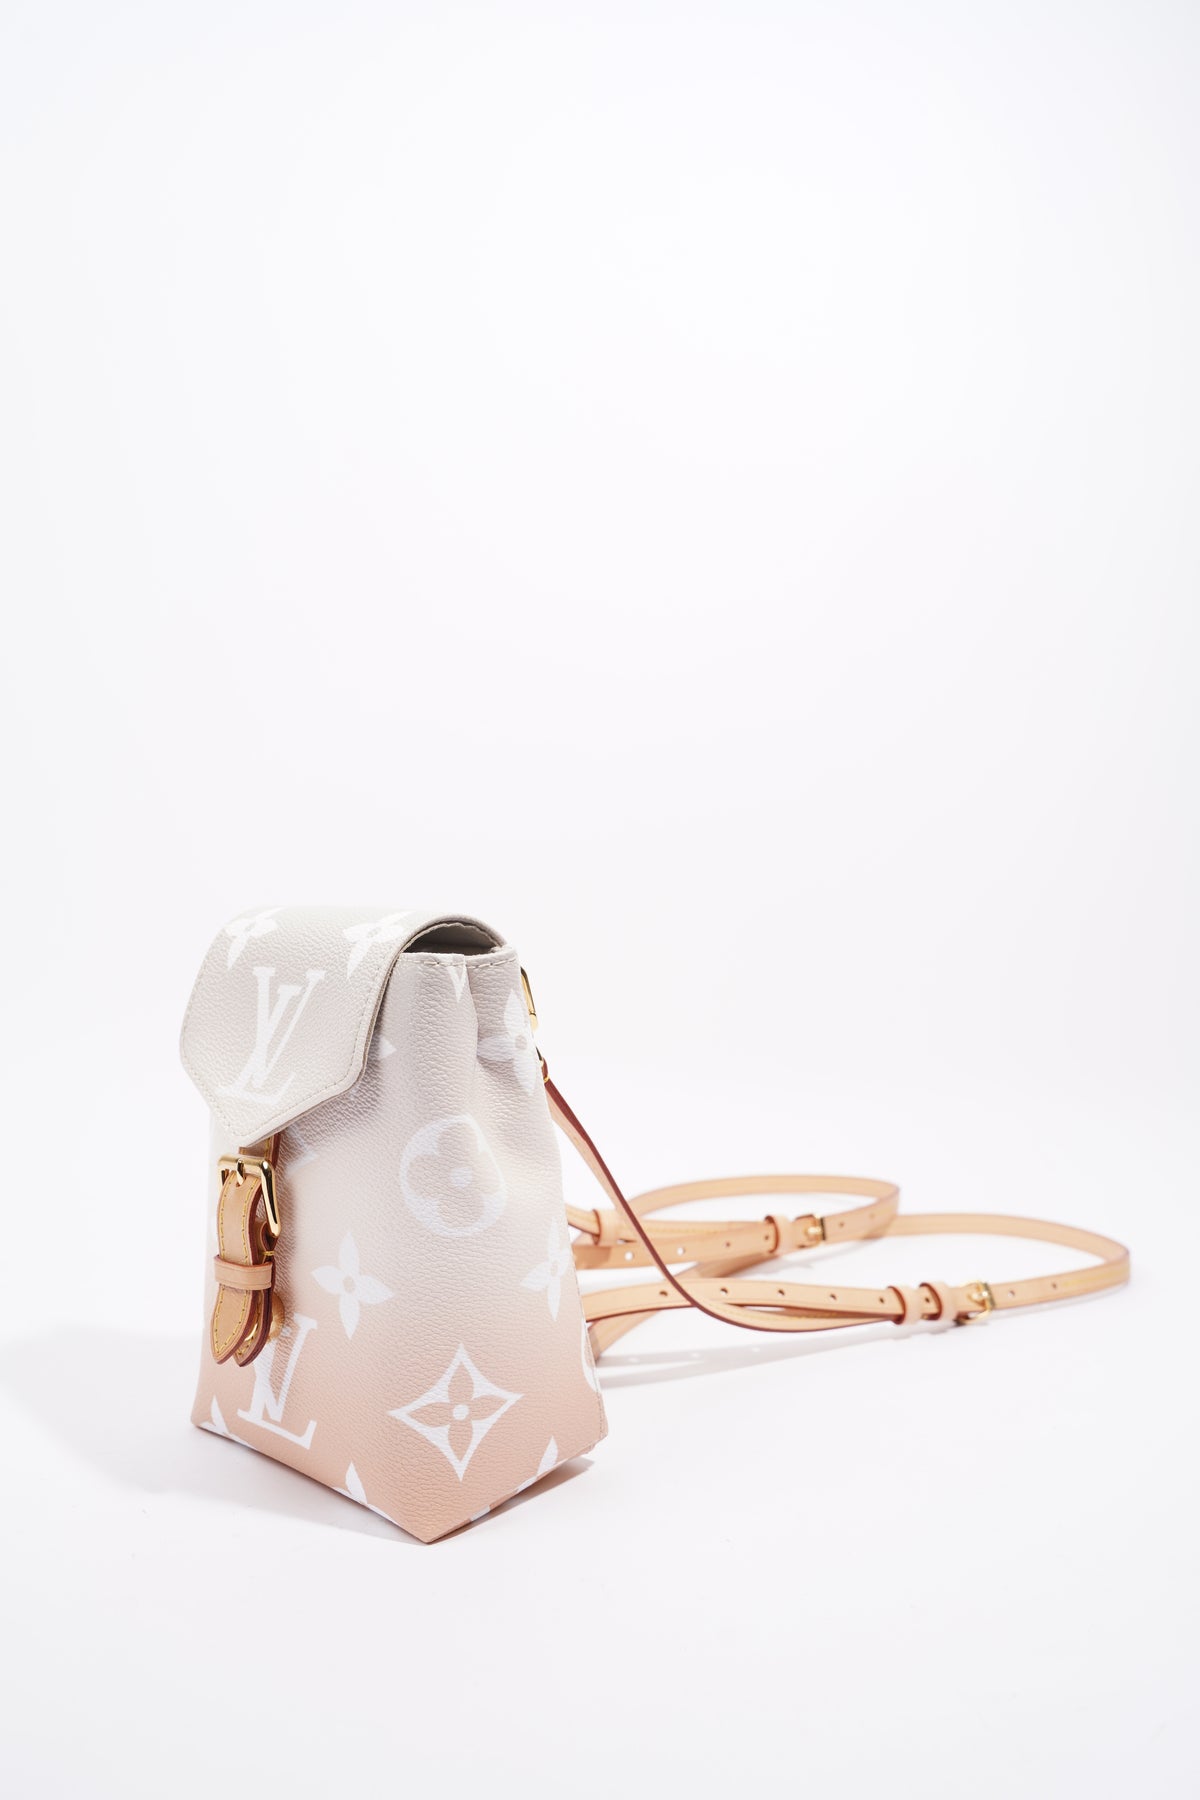 Shop Louis Vuitton Tiny backpack (M45764) by 環-WA